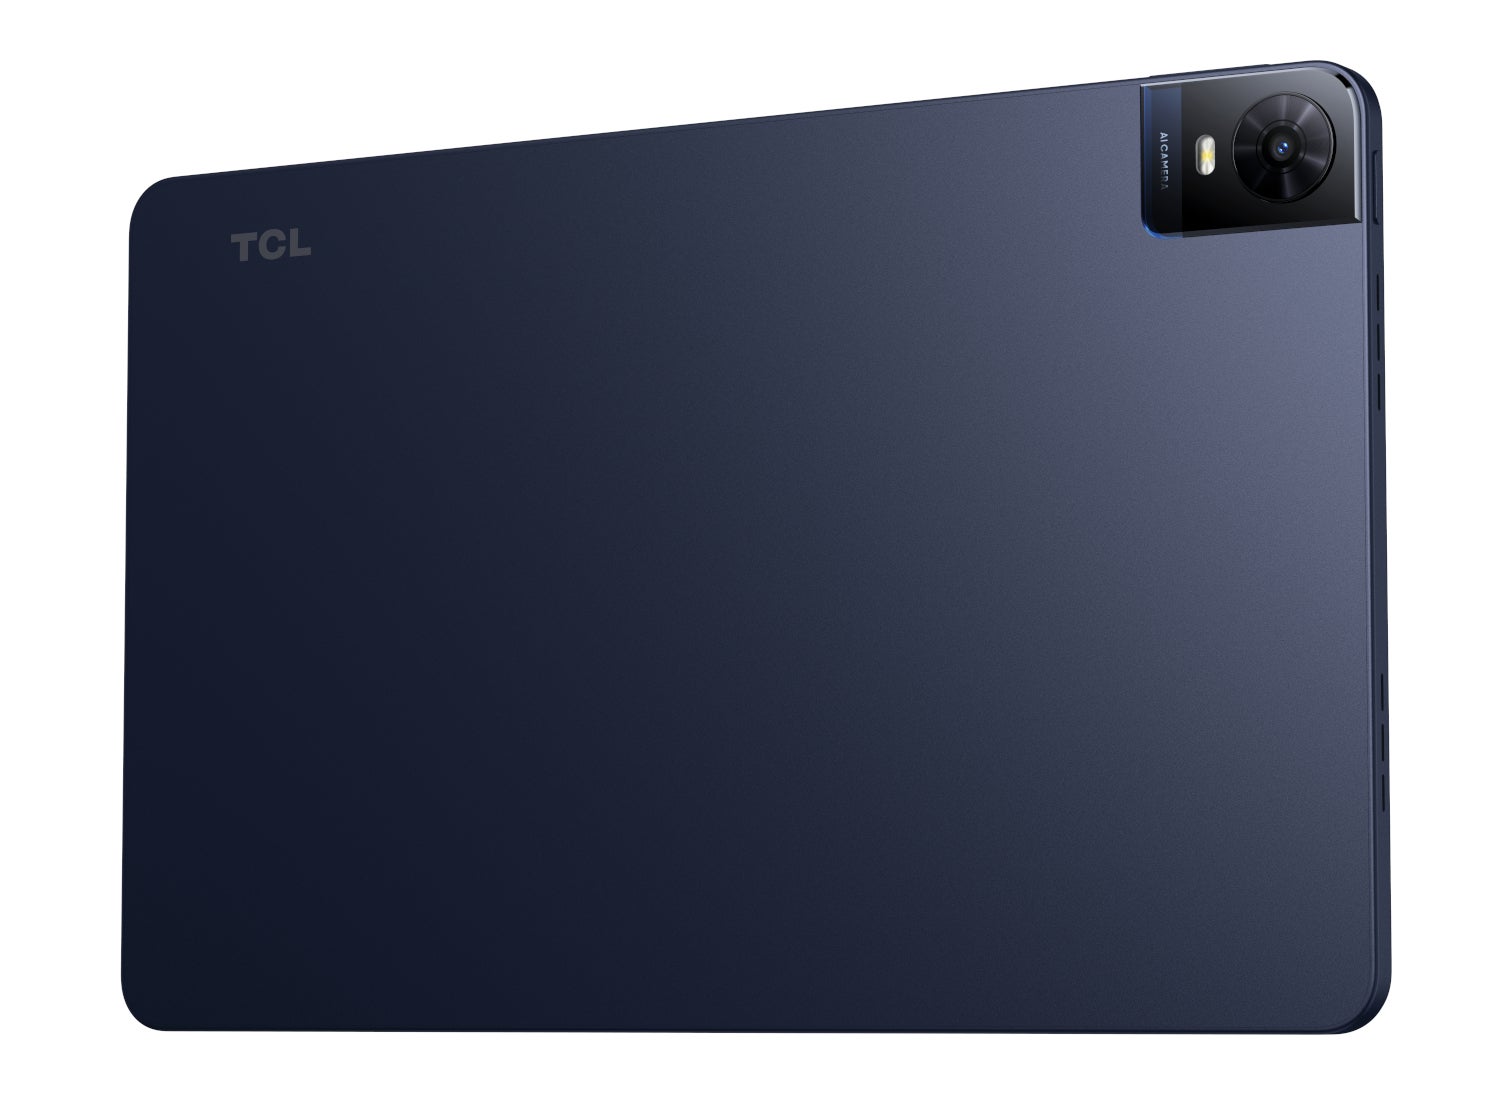 TCL TAB 10 NXTPAPER 5G, Credits - TCL - Verizon launches affordable 5G tablet with 10-inch display